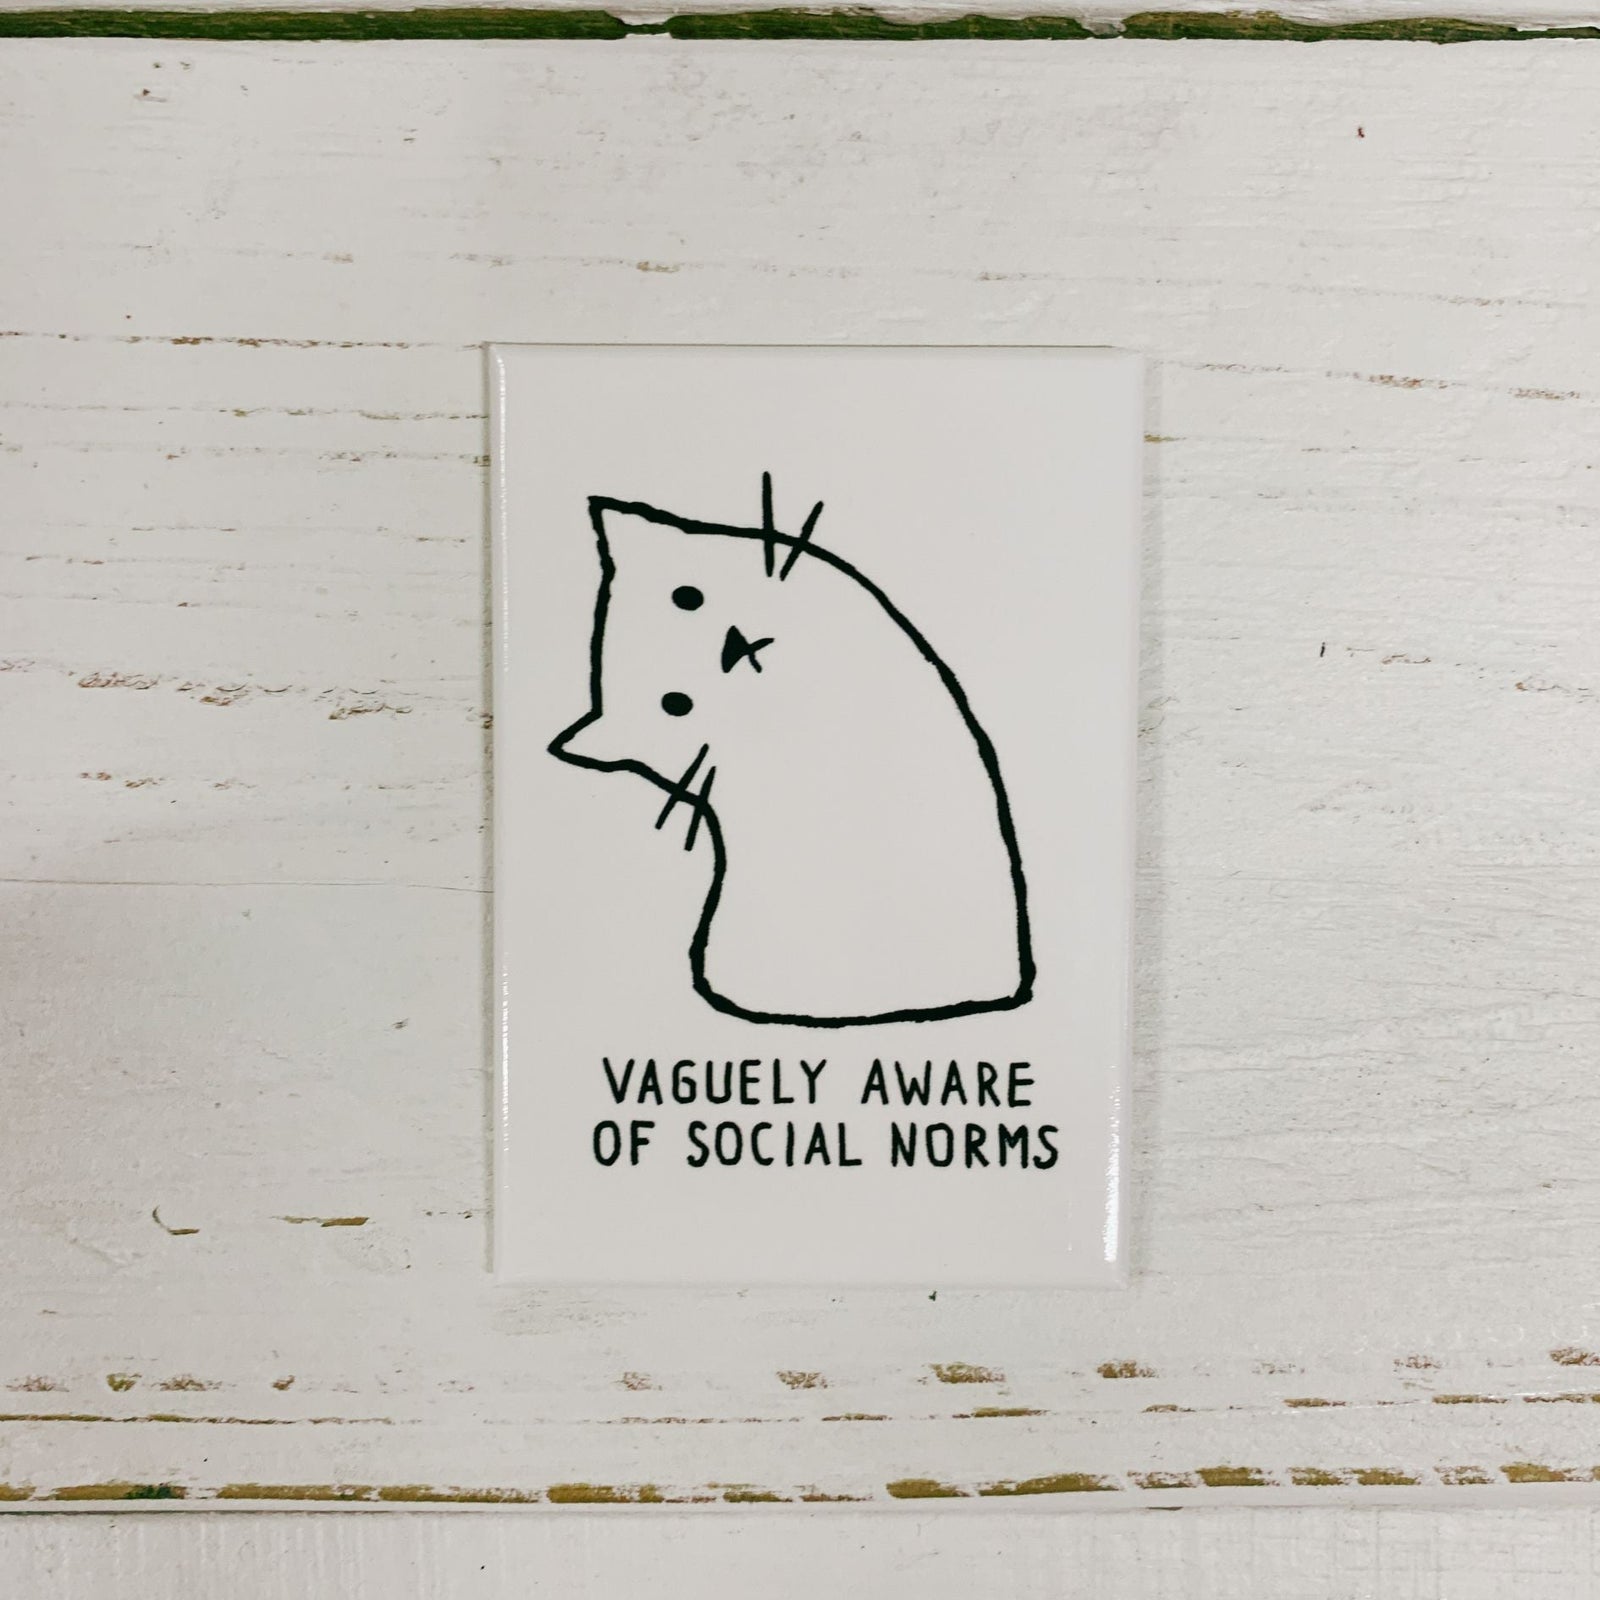 Vaguely Aware of Social Norms Magnet | 2.5" X 3.5"